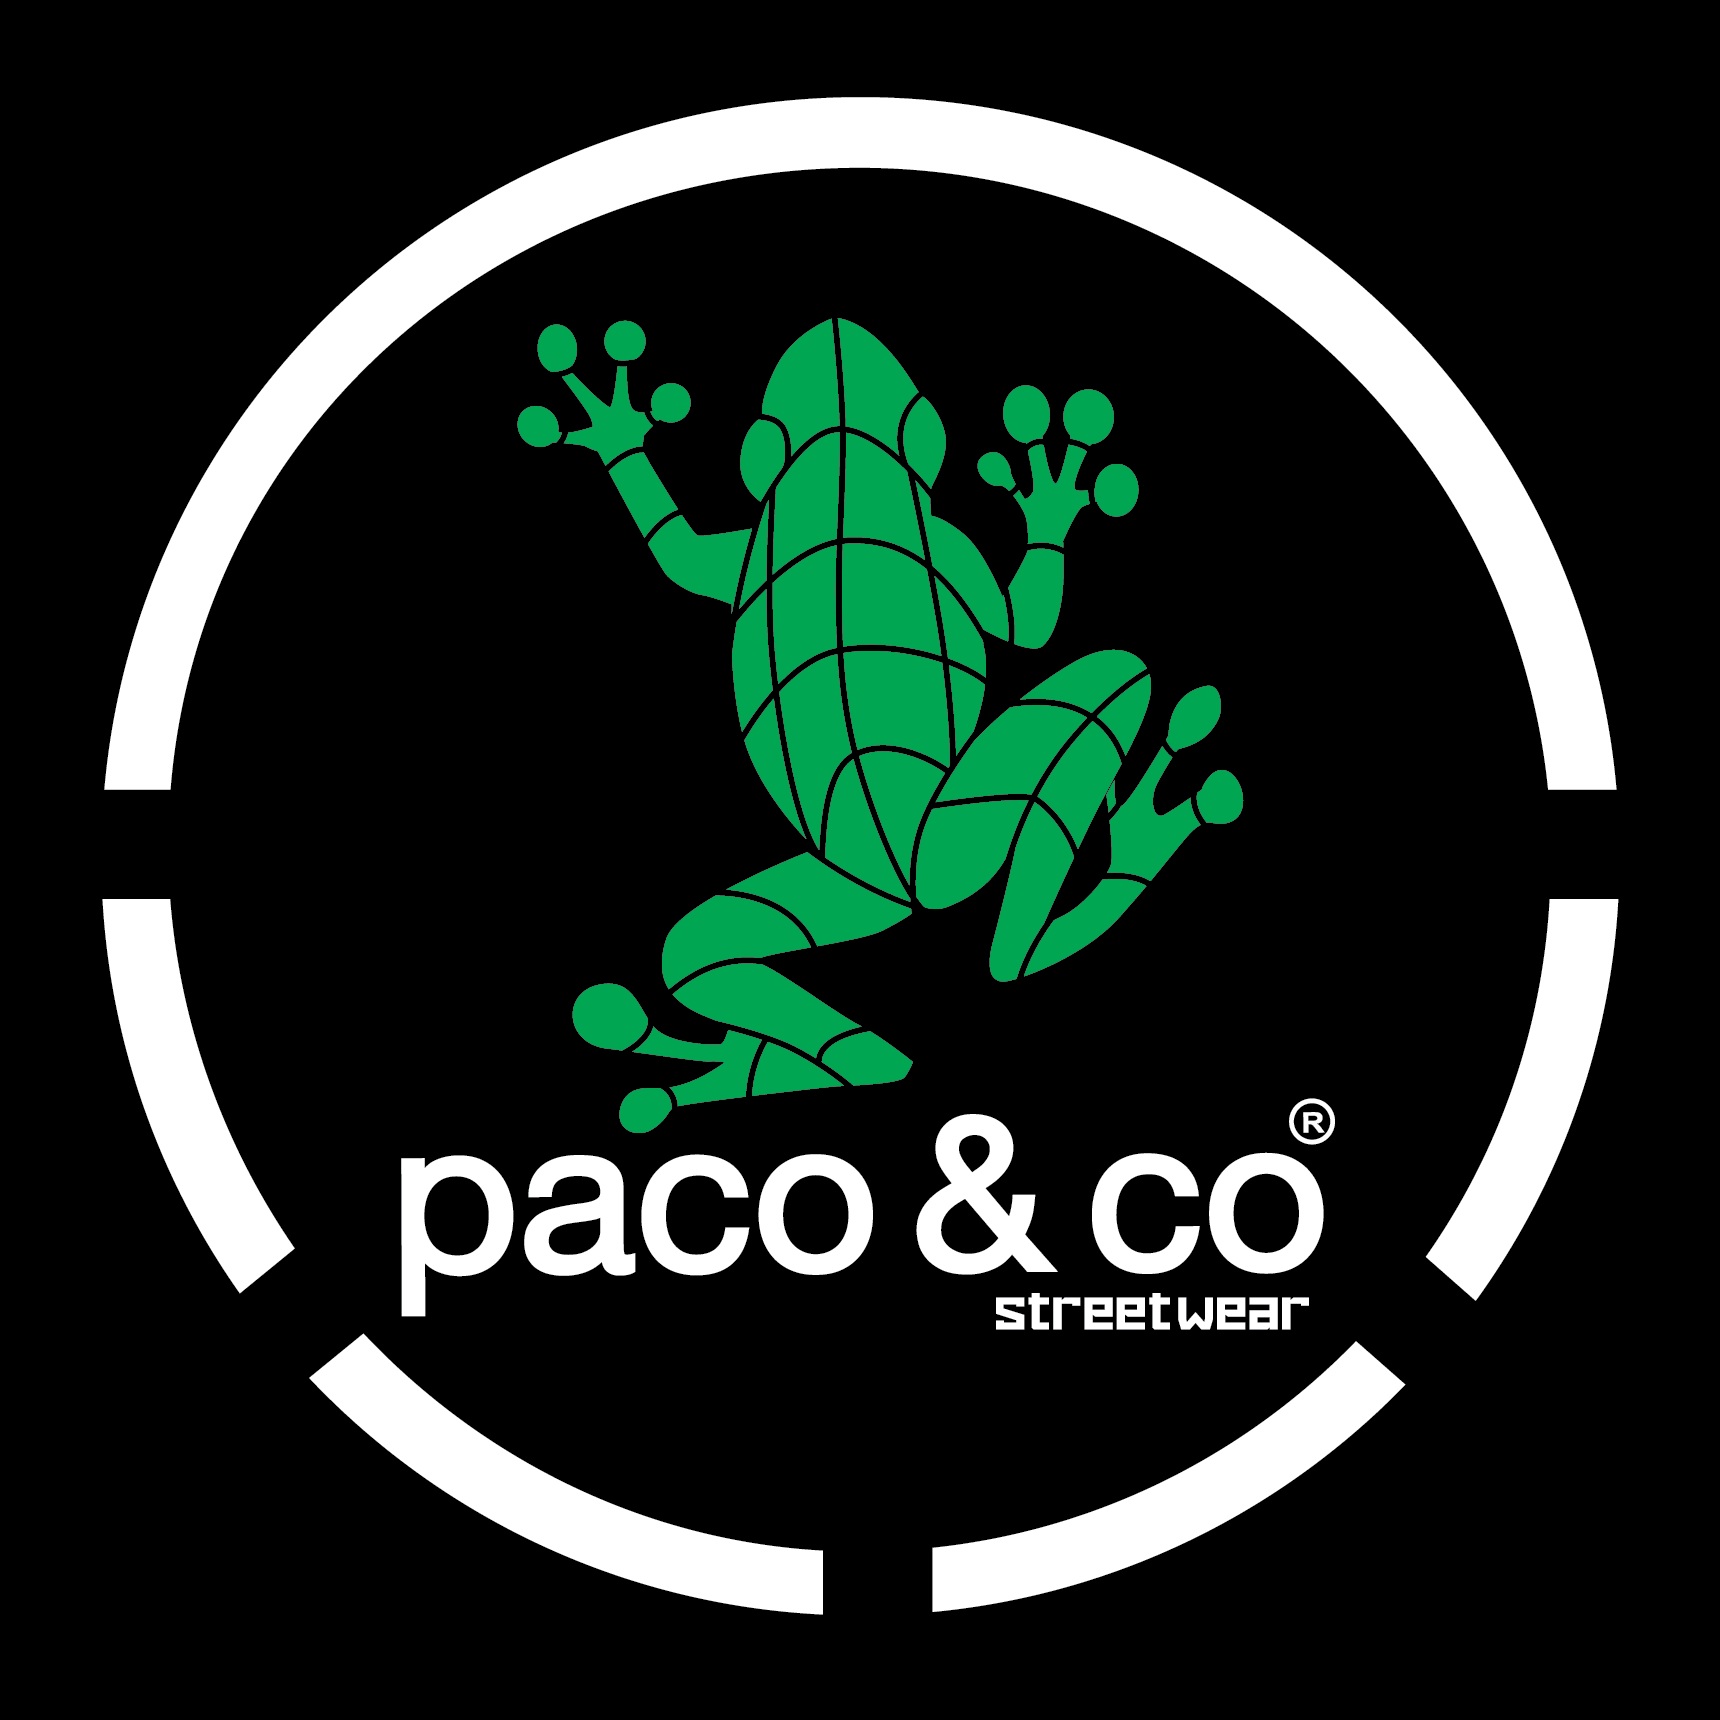 Paco & co